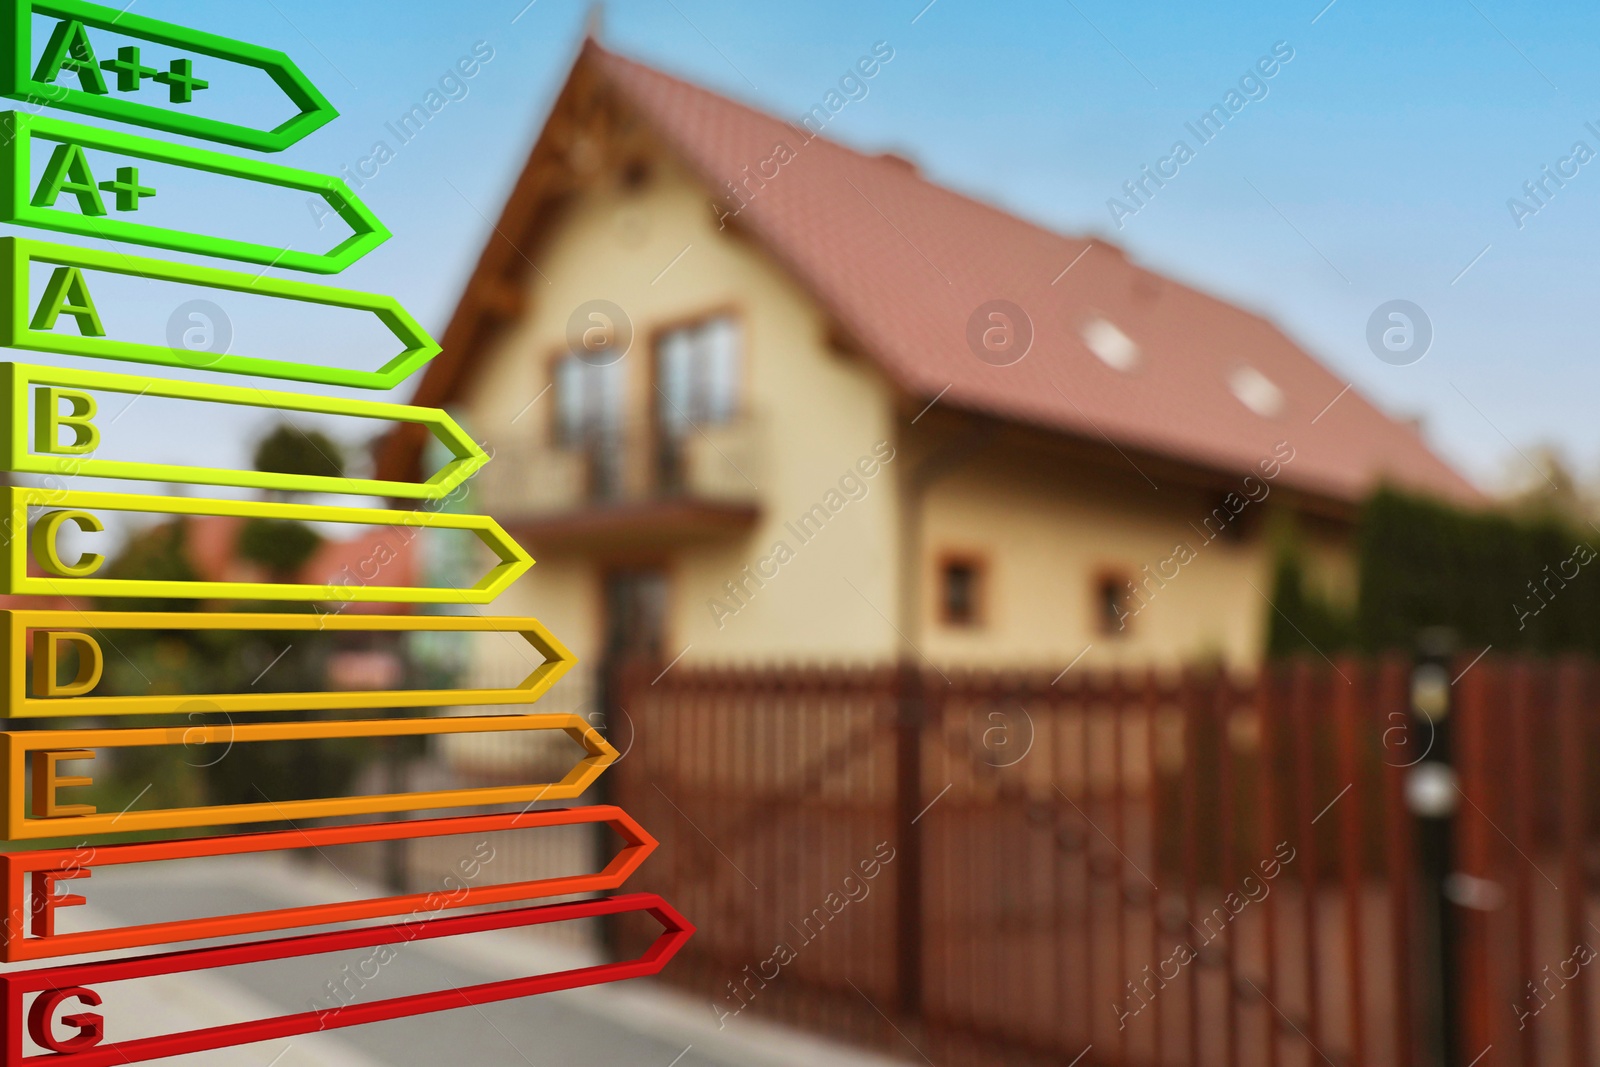 Image of Energy efficiency rating and blurred view of house outdoors